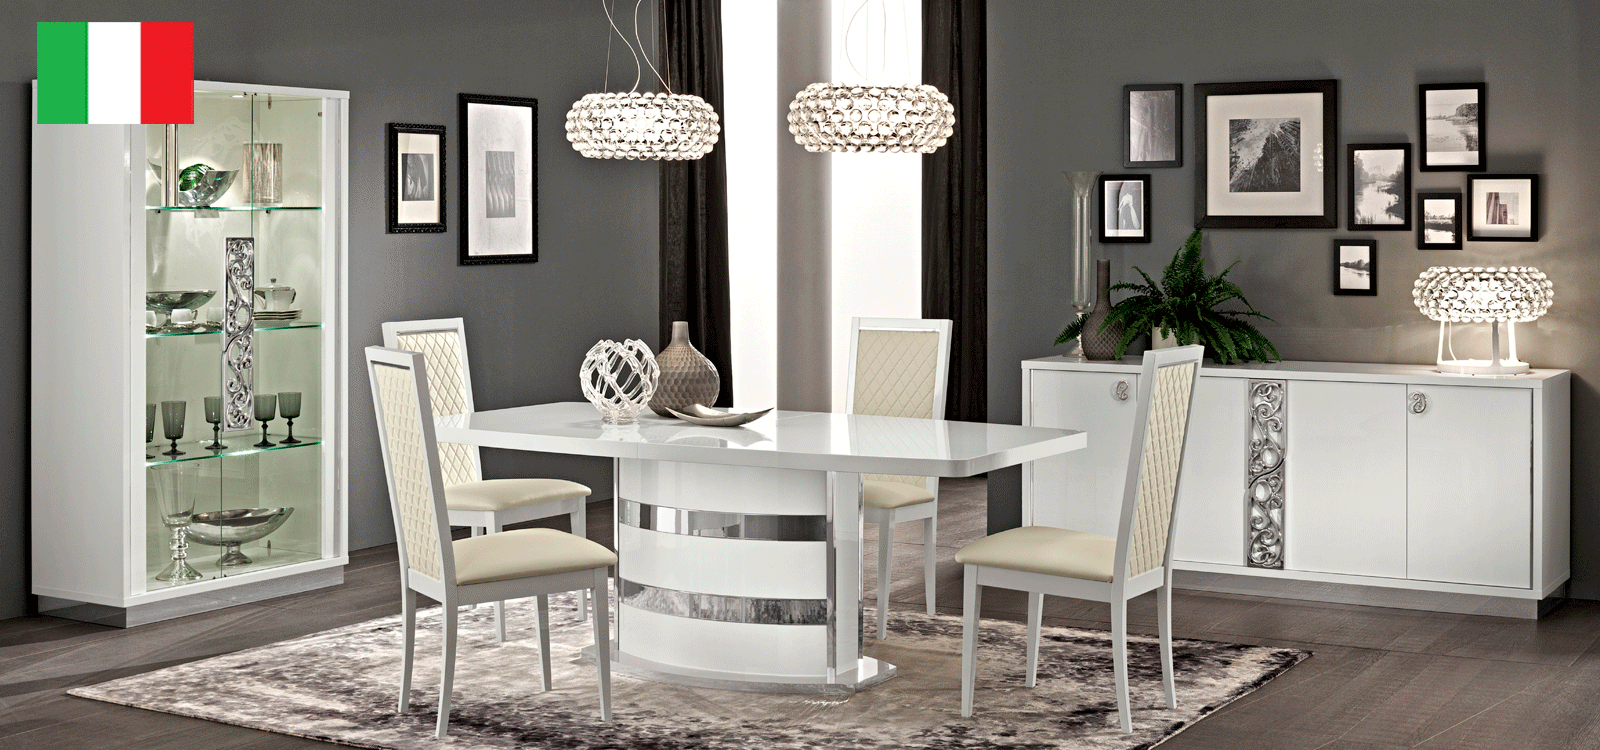 Dining Room Furniture Kitchen Tables and Chairs Sets Roma Dining White, Italy